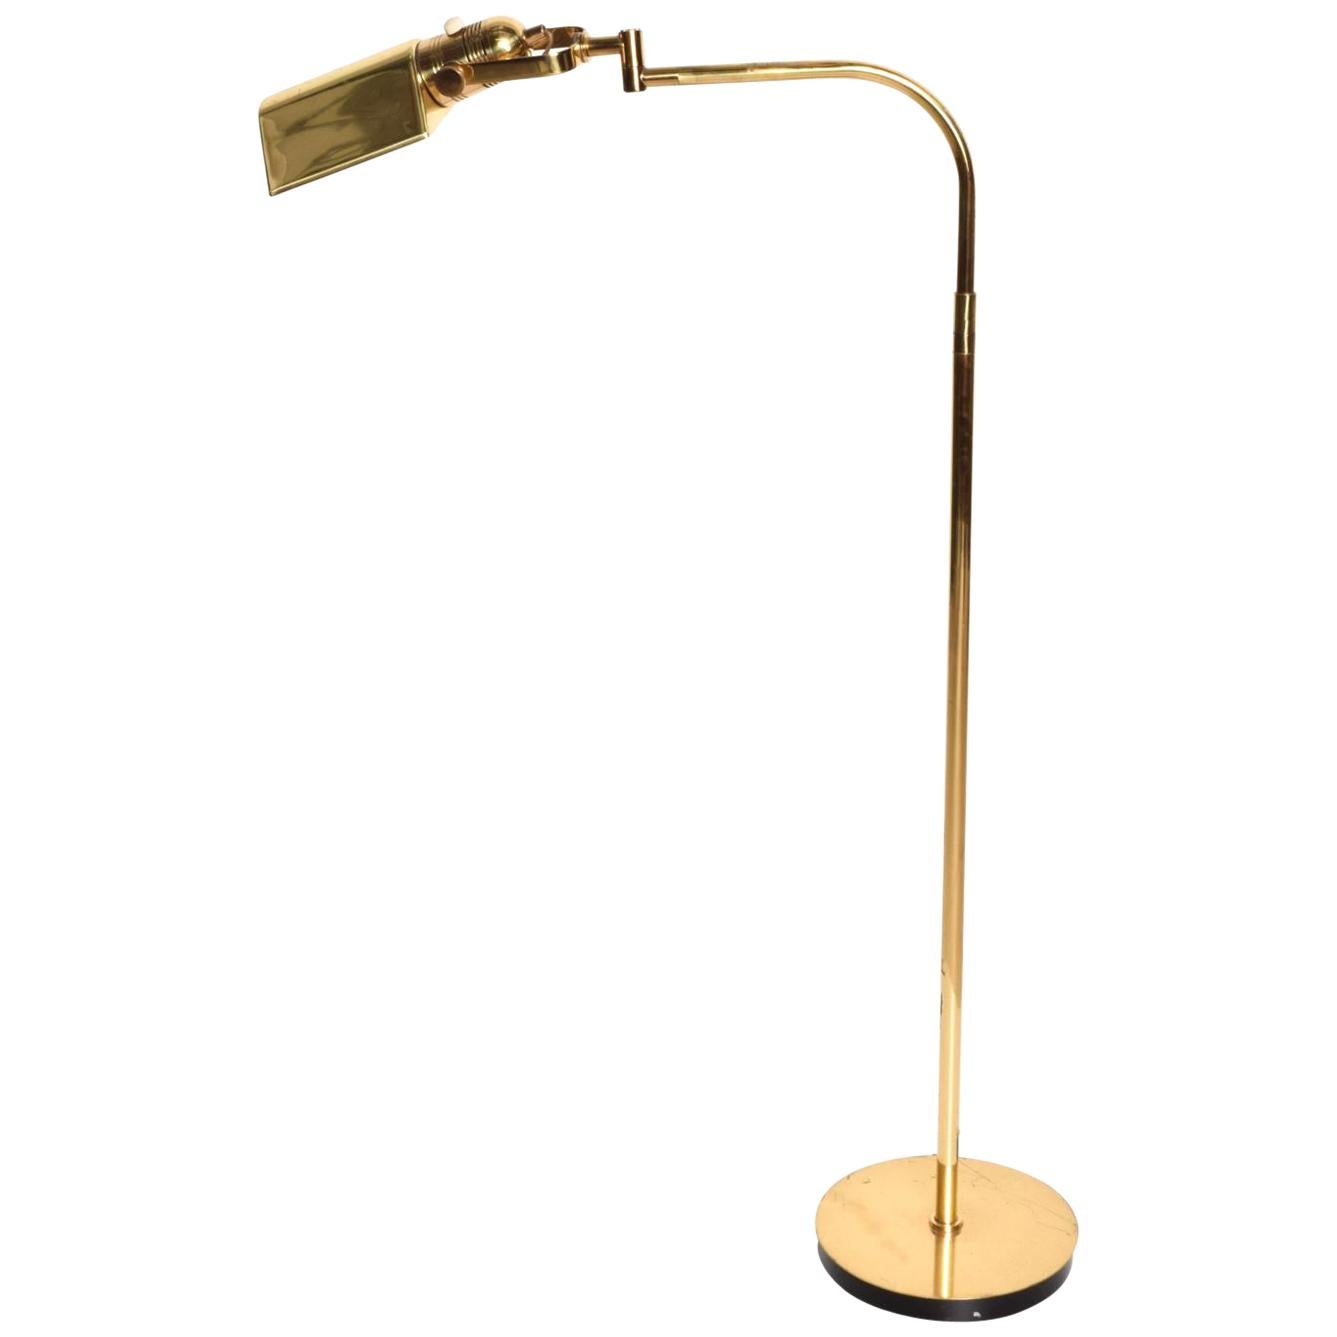 Pharmacy Reading Floor Lamp Brass by NESSEN Studios Bronx New York
Articulated shade-diffuser can be positioned in almost any desired position. Height is adjustable.
Stamped underneath with maker's label.
Sculptural neck.
43.5 tall x 22.5 D x. 9.5 W